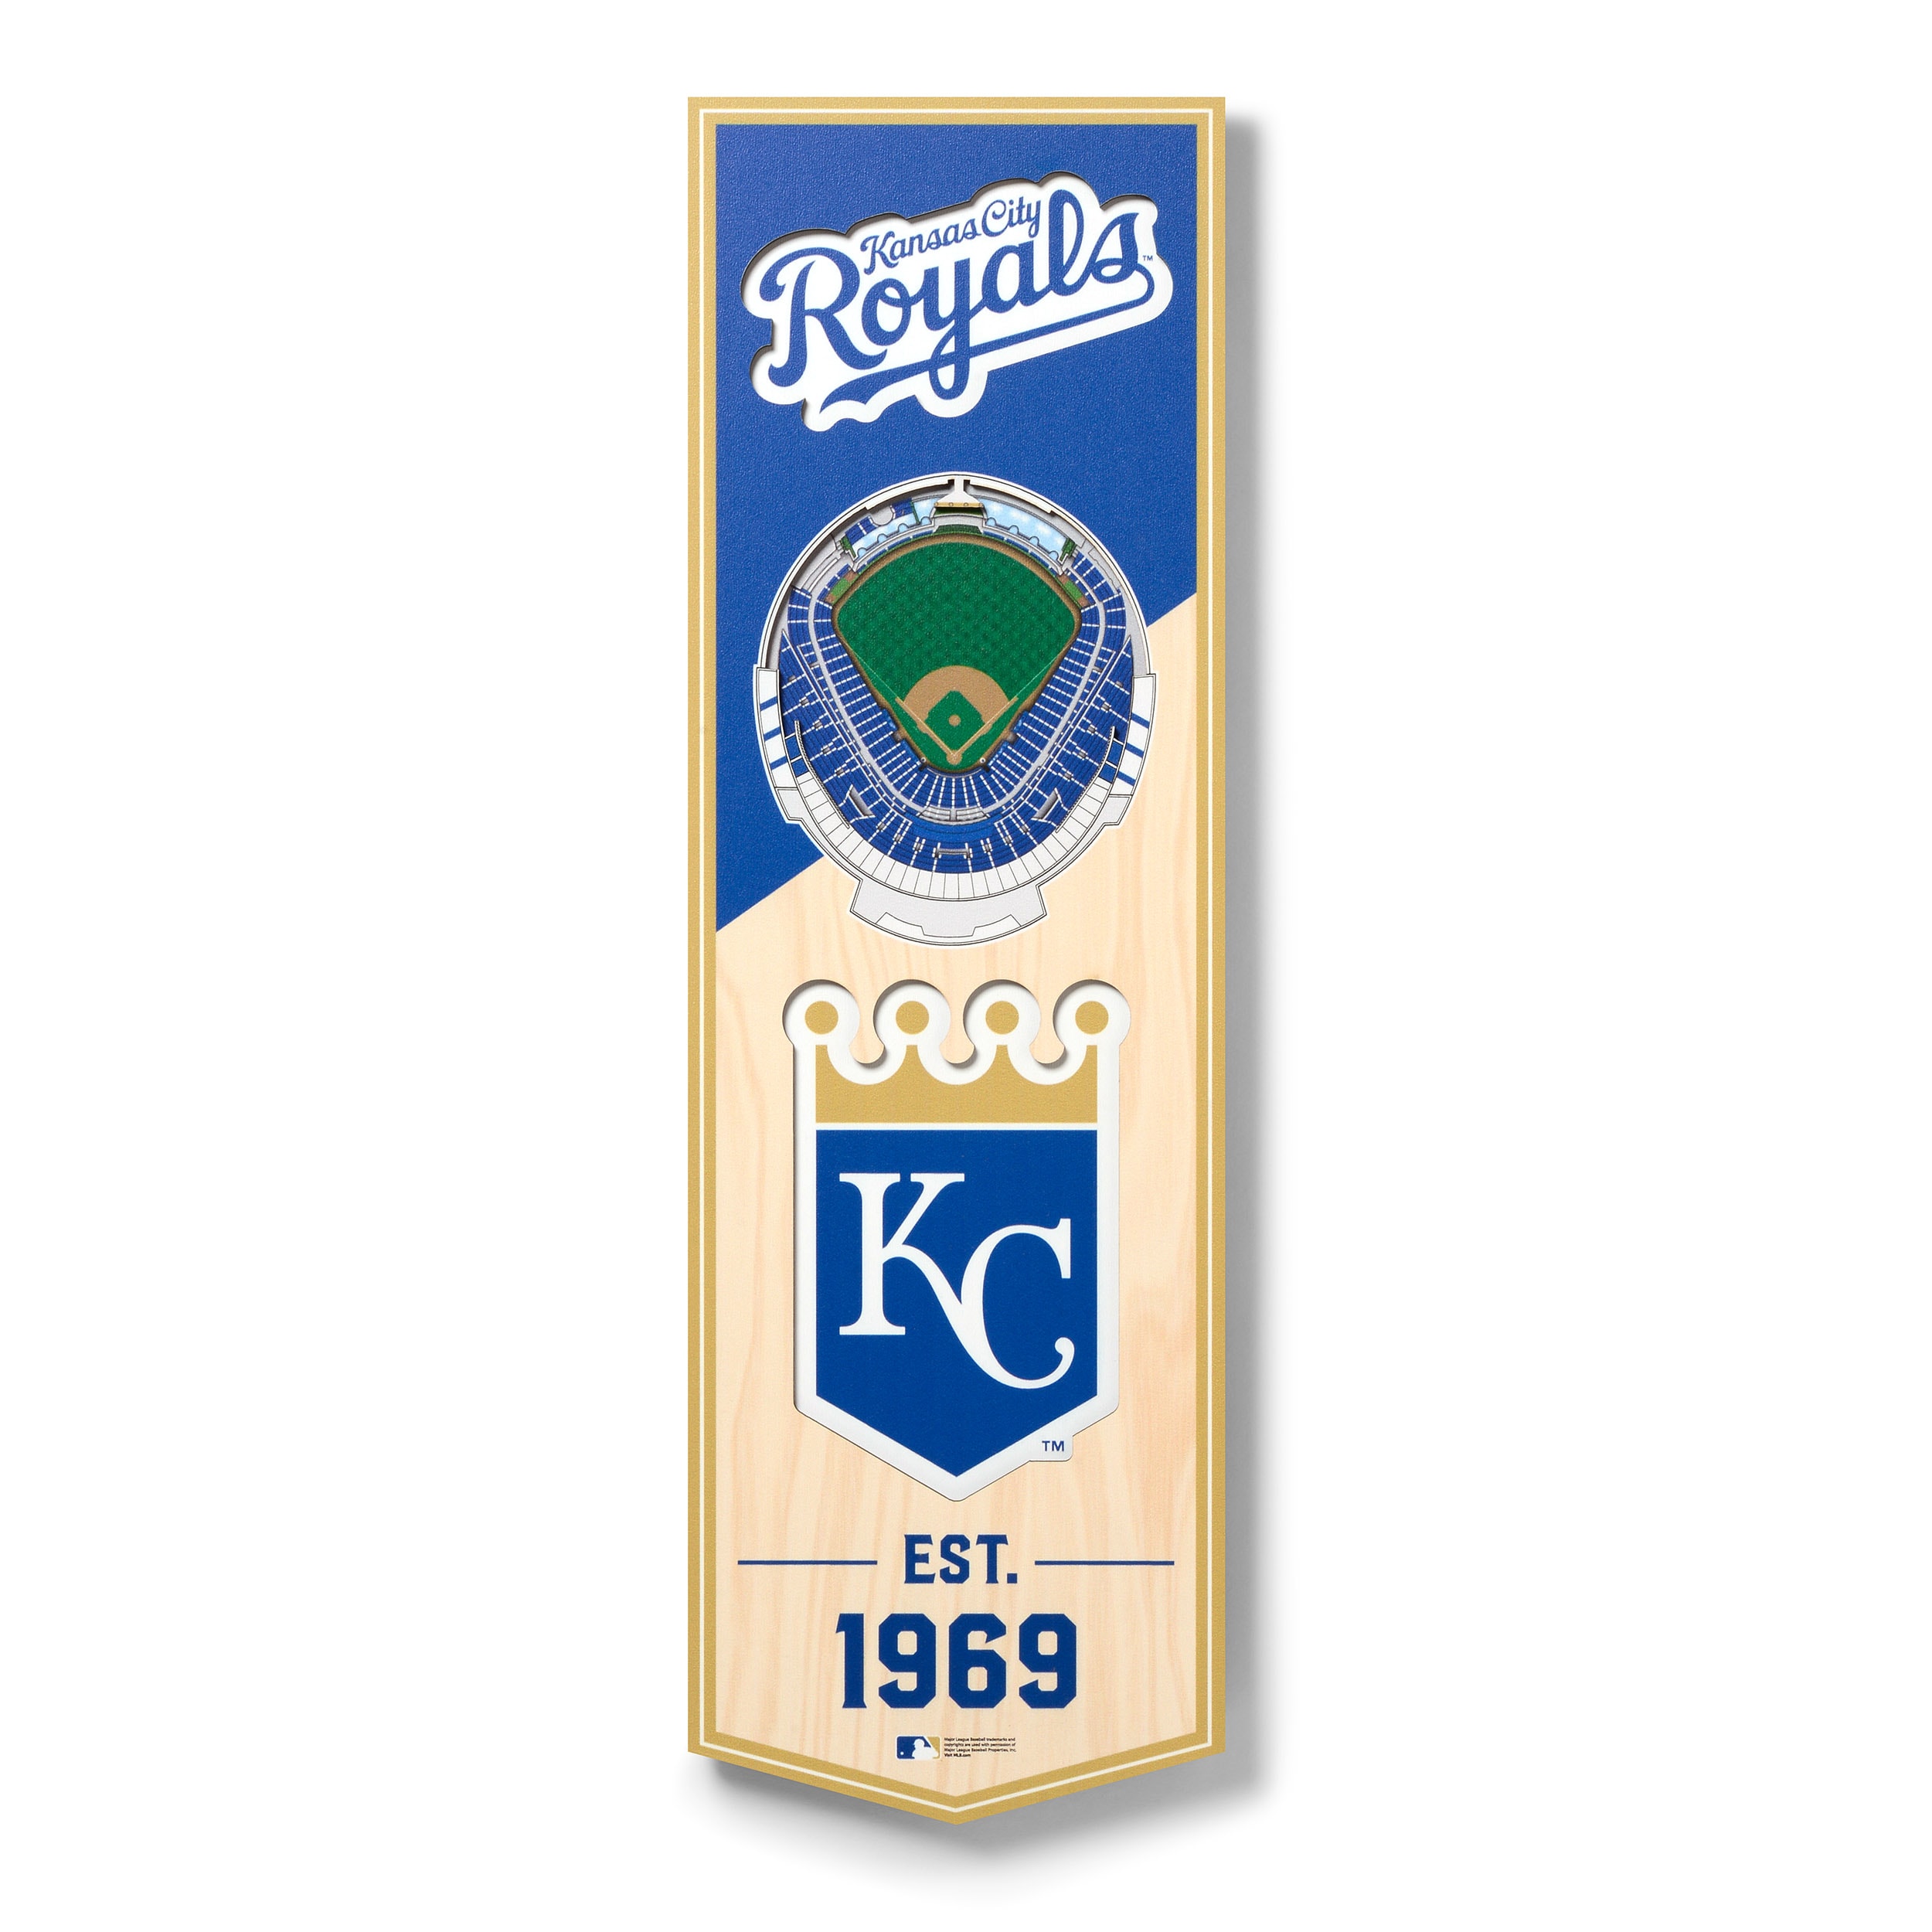 Here are your 1969 Kansas City Royals - Royals Review